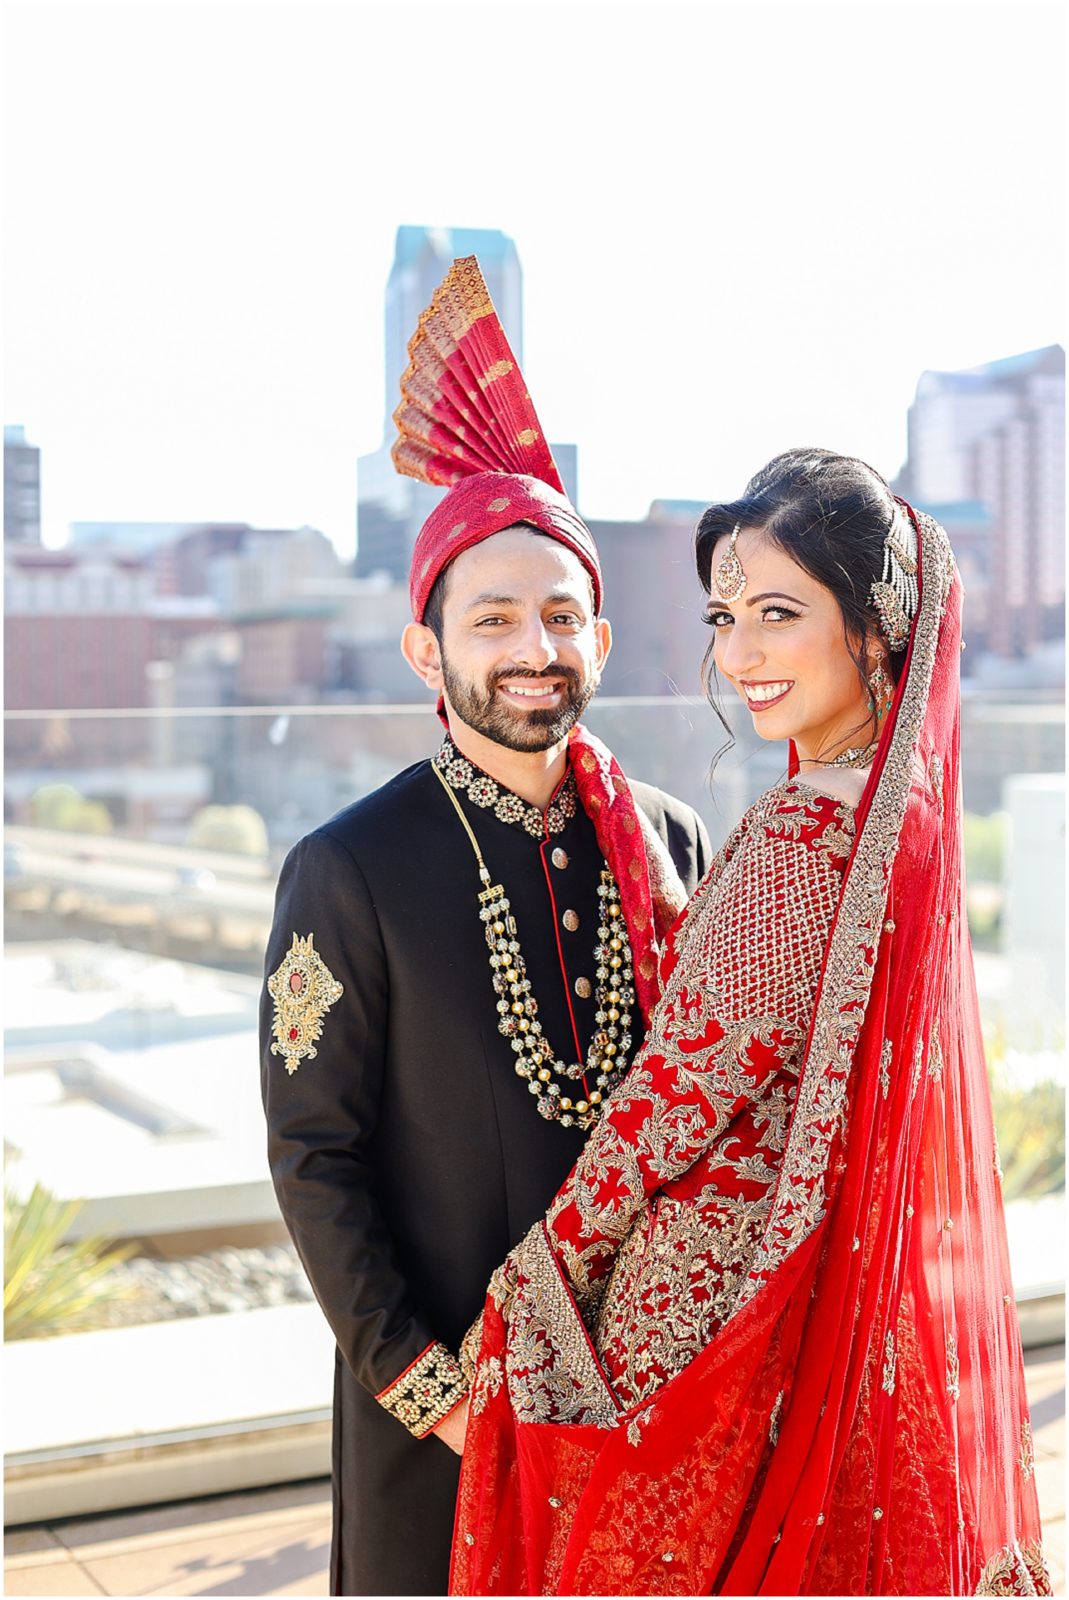 amazing photos of indian weddings in st. louis and kansas city - wedding photography 